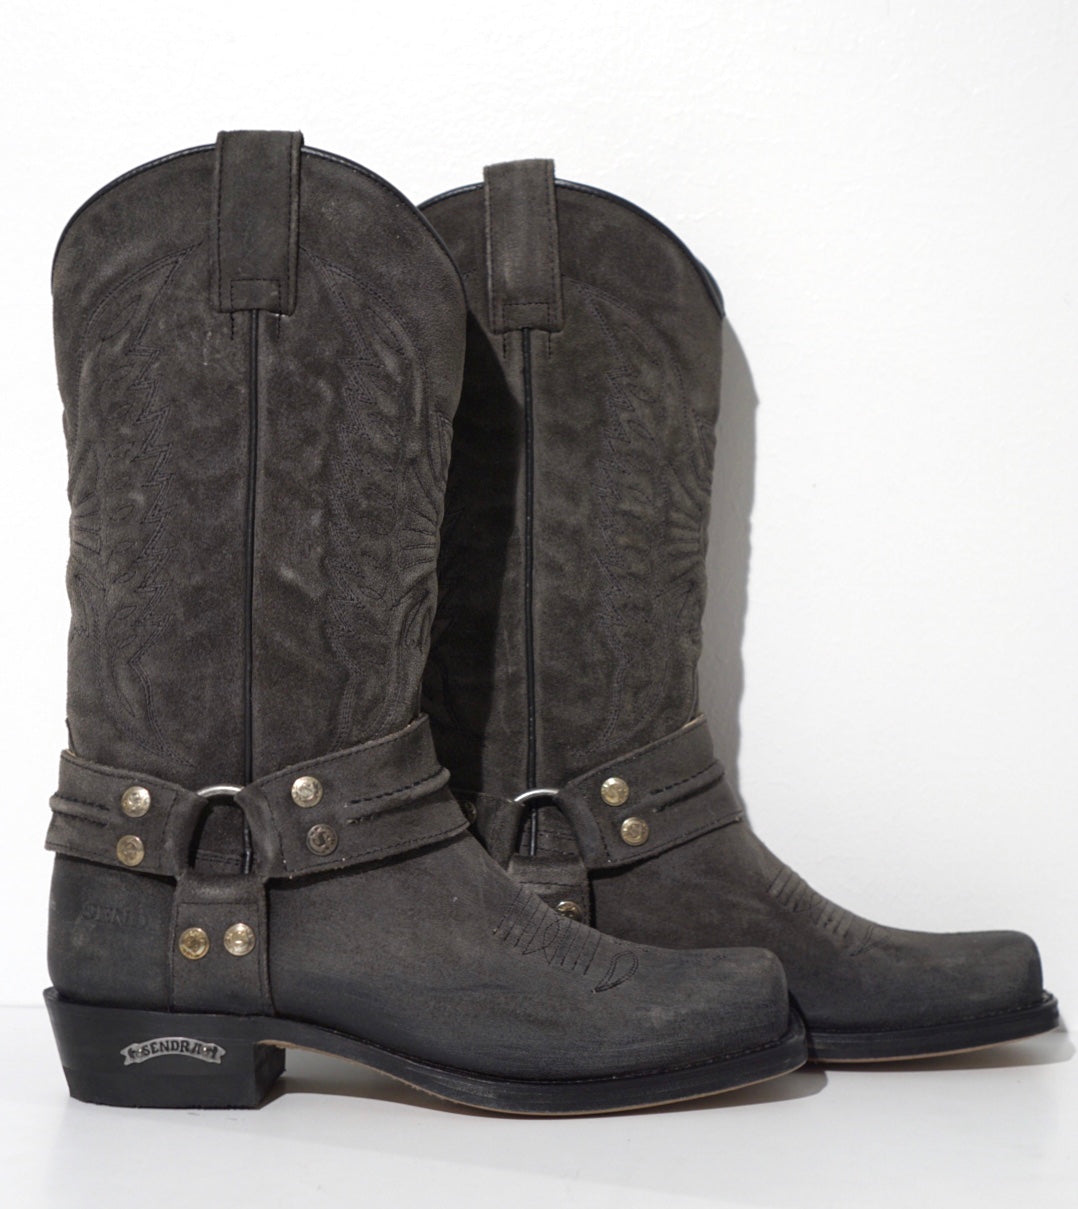 Pete Eagle boots - antra